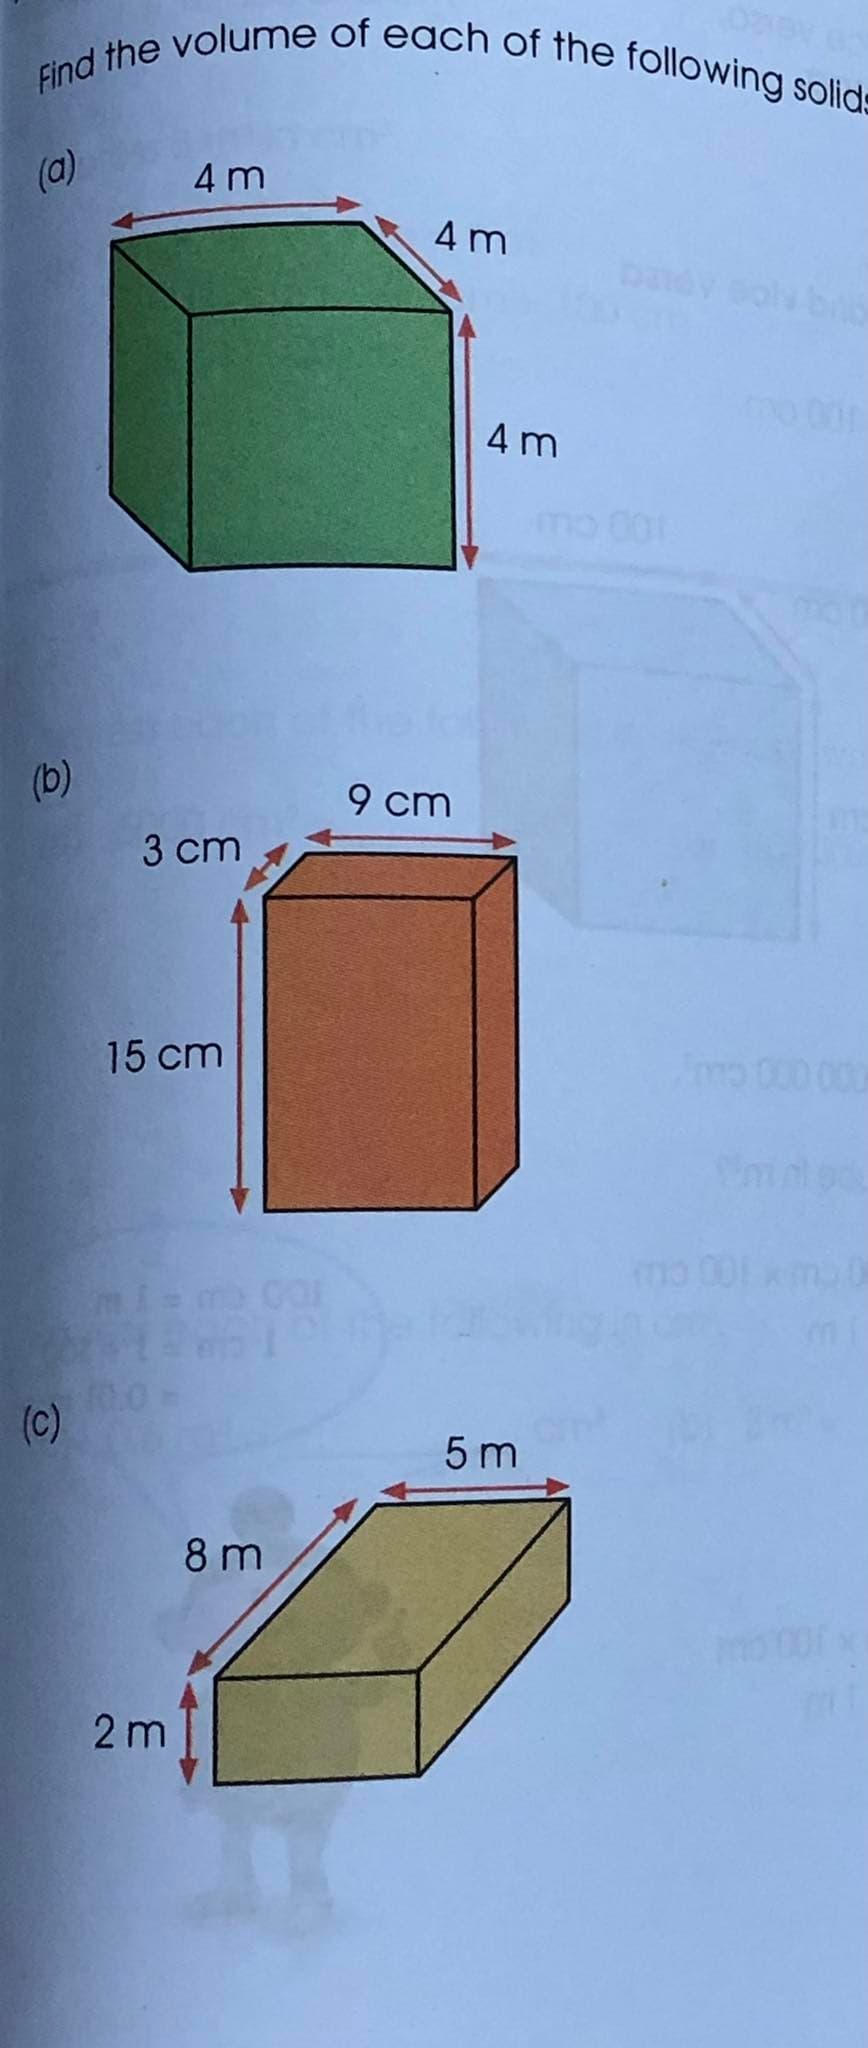 Find the volume of each of the following solid
(a)
4 m
4 m
4 m
(b)
9 cm
3 cm
15 cm
(c)
5 m
8 m
2 m
